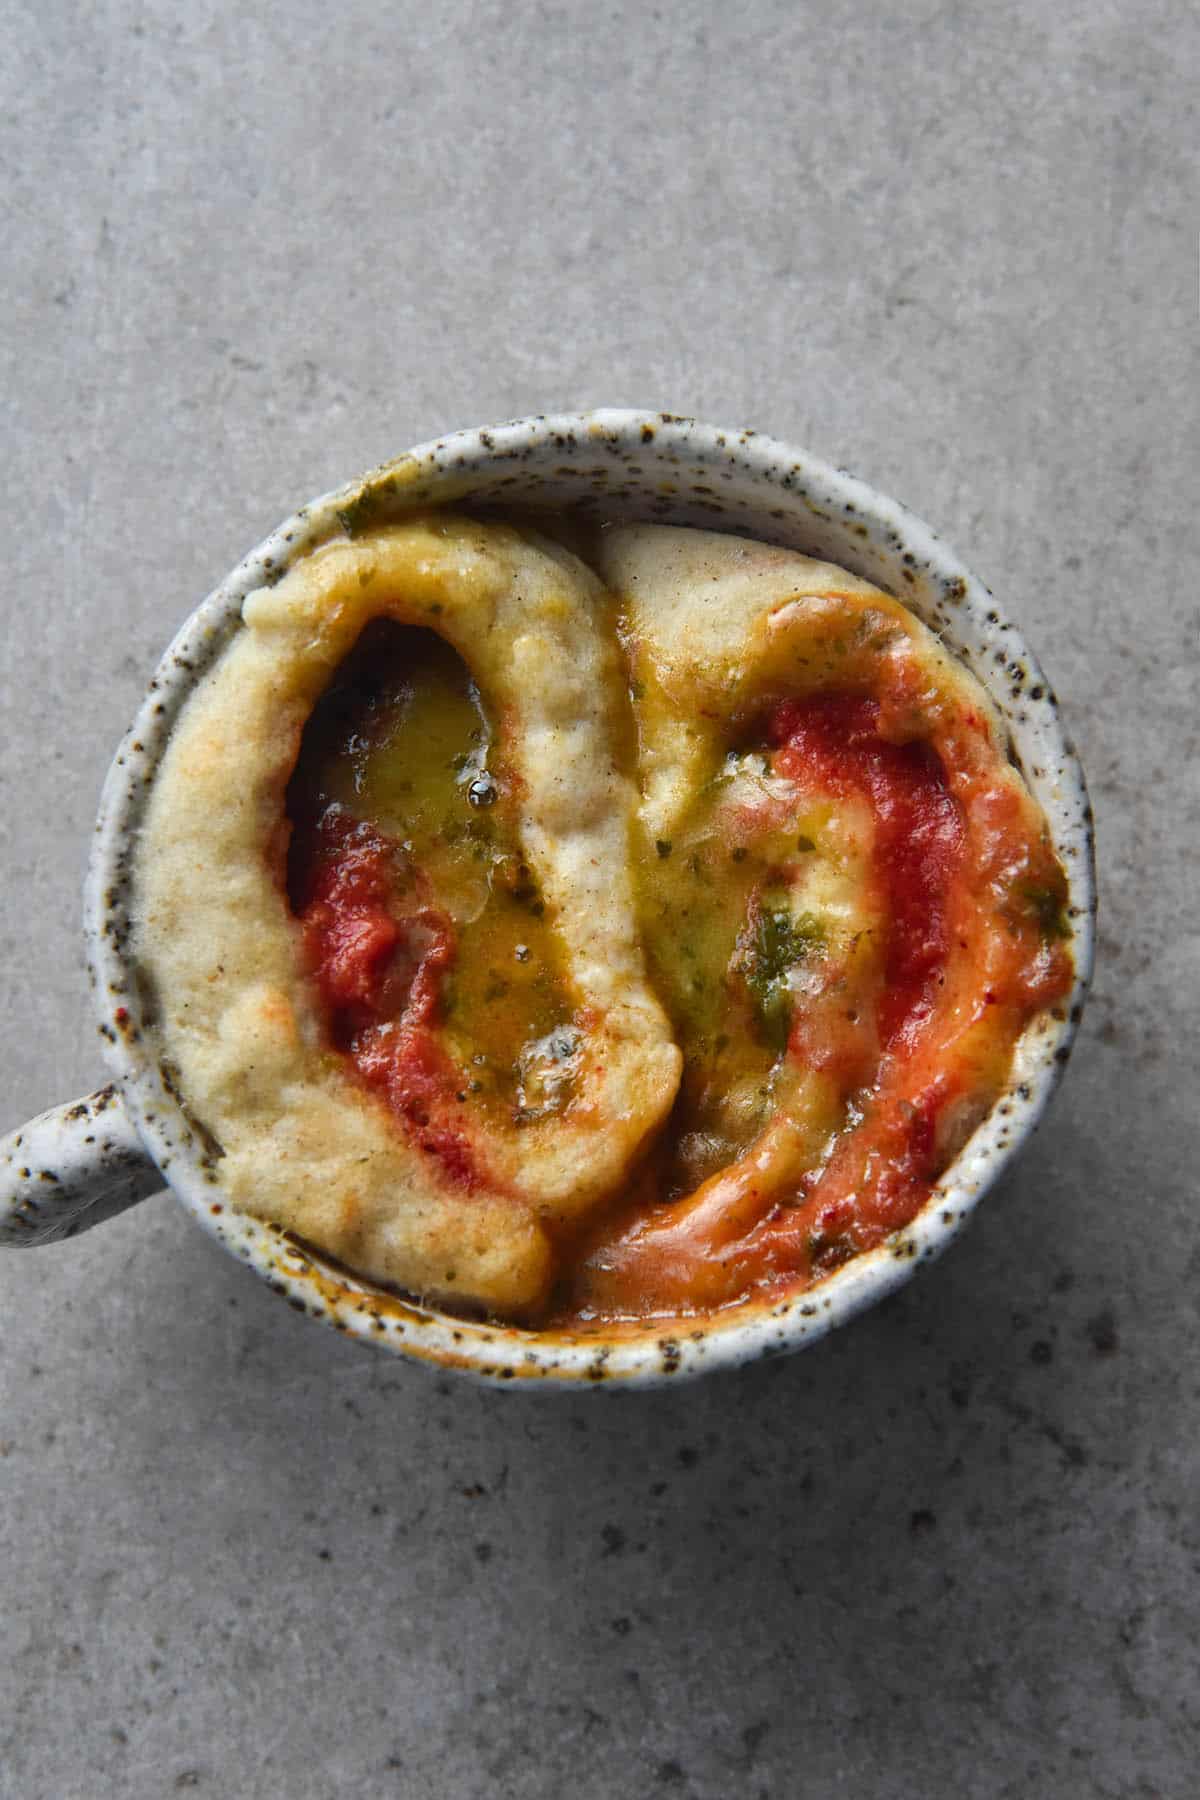 An aerial close up view of a pizza flavoured mug cake. The background is a light grey stone colour and atop that sits the white speckled mug. Inside the mug is two swirls of a gluten free savoury scroll which has been cooked in the microwave. The scrolls are filled with pizza sauce, pesto and melty cheese, and the ingredients have mingled together to form different hues during the cooking process